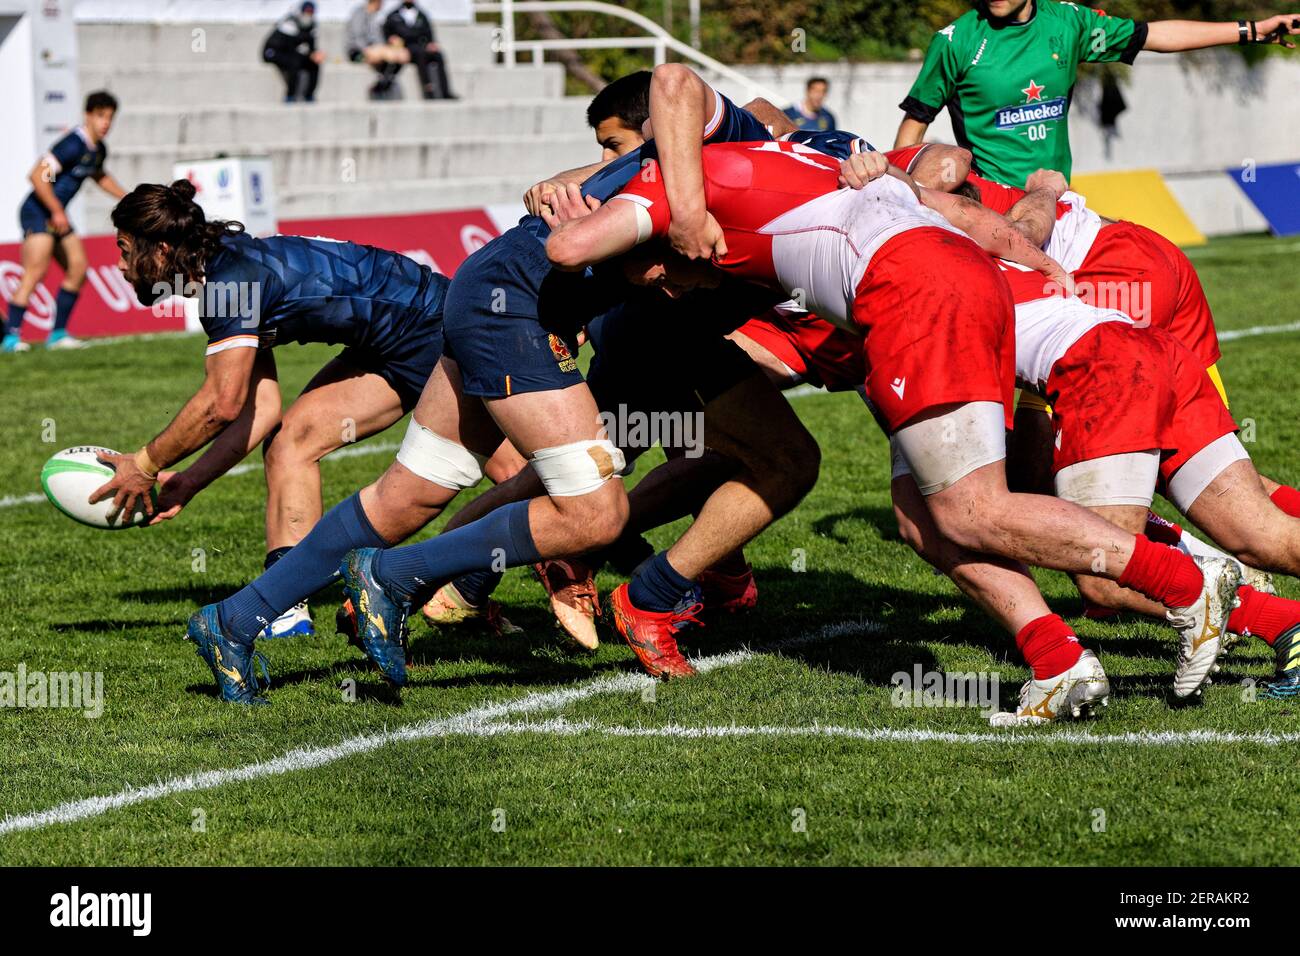 Madrid, Spain. 28th Feb, 2021. Madrid Rugby 7s International Tournament. Men's tournament. 2nd weekend, 2nd day. Spain vs Portugal. Complutense University, Madrid, Spain. Credit: EnriquePSans / Alamy Live News Stock Photo